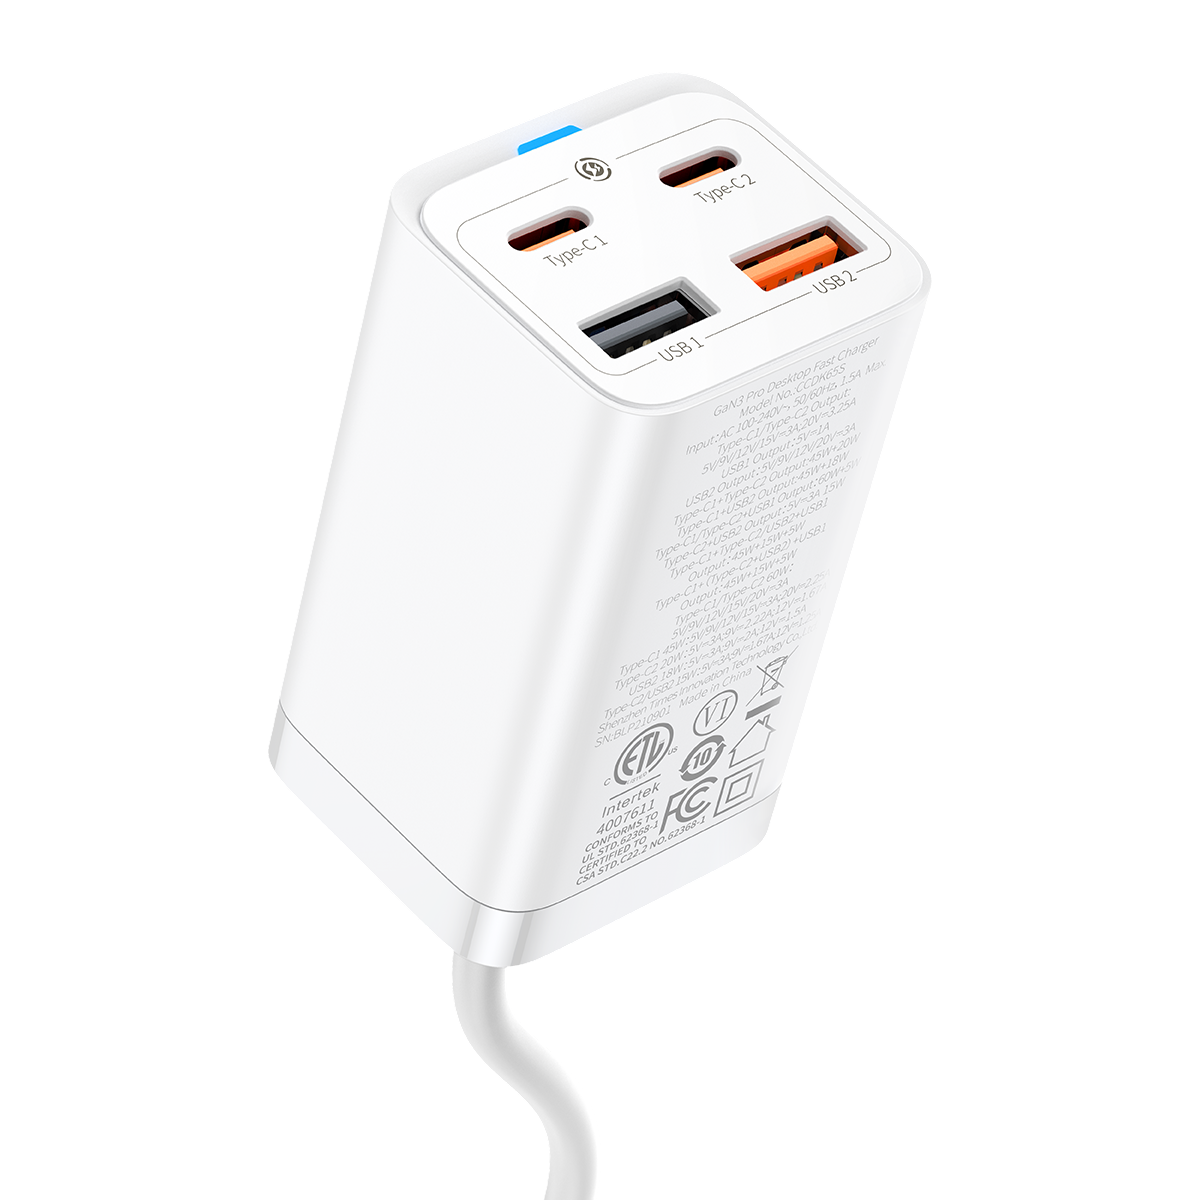 Baseus GaN3 Pro Desktop Fast Charger 2C+2U 65W US White(Include：Baseus Xiaobai series fast charging Cable Type-C to Type-C 100W(20V/5A) 1m White）